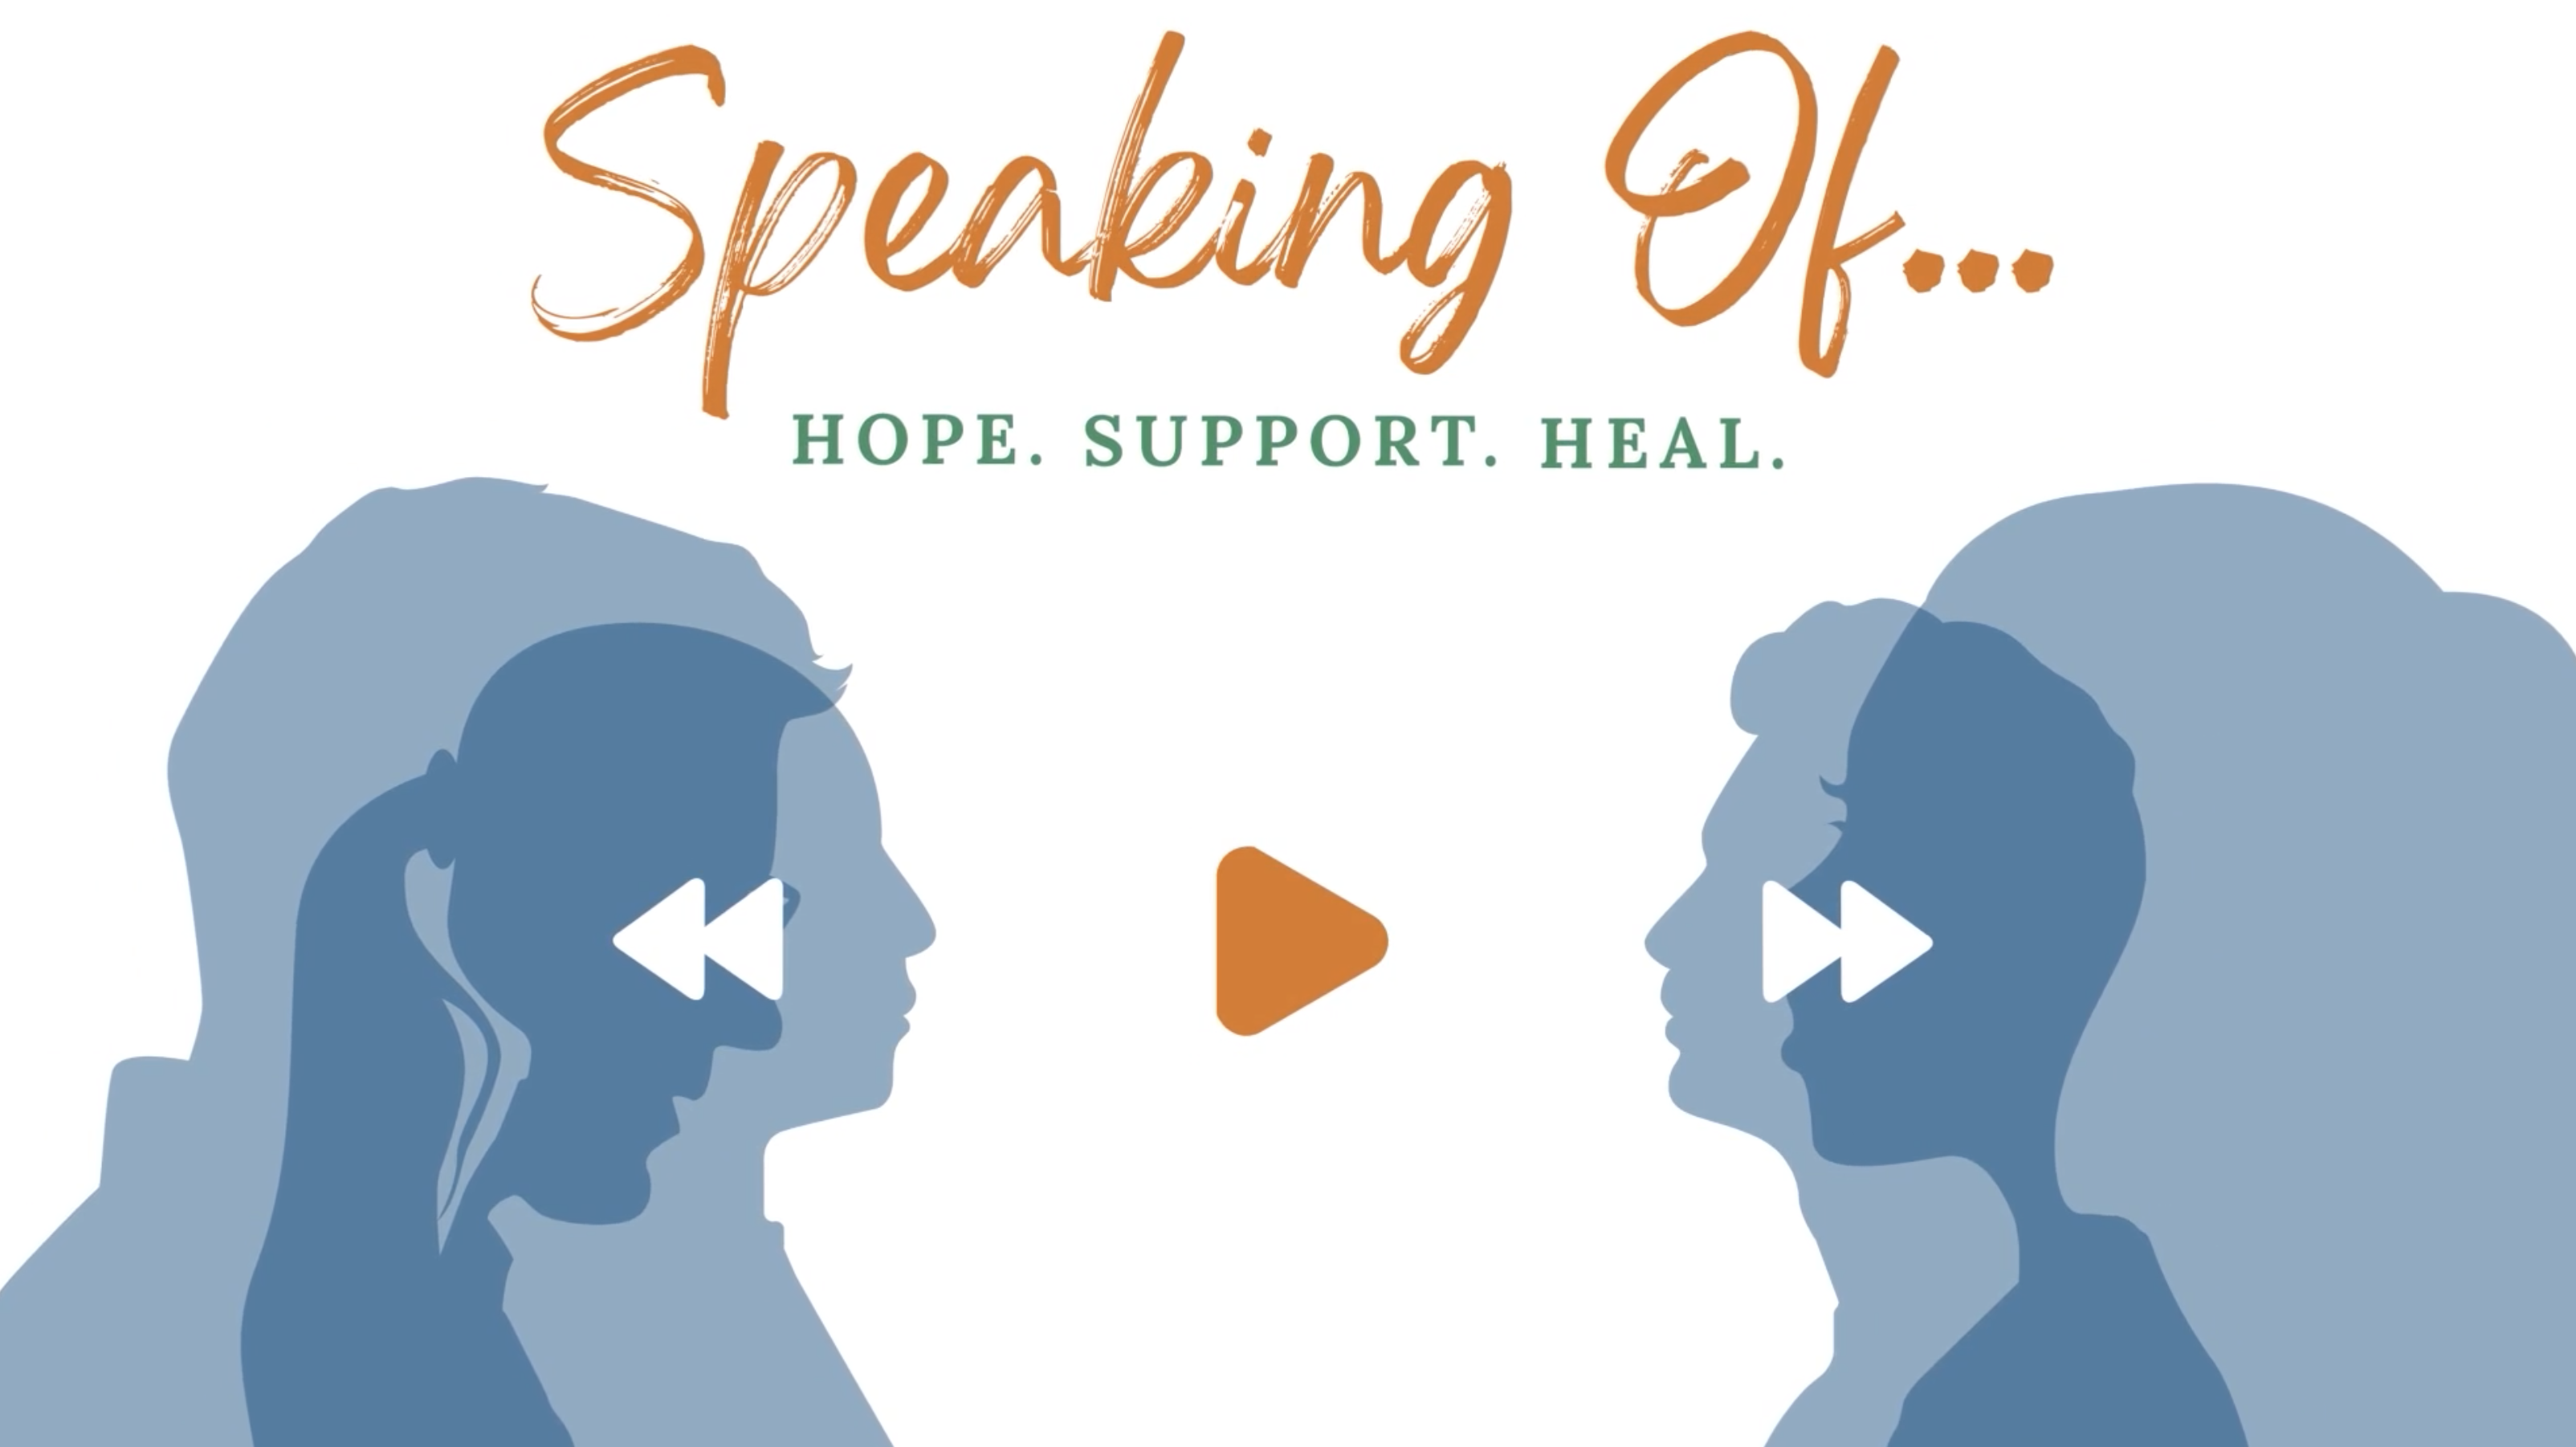 Episode 4 – Speaking Of… Hope. Support. Heal.